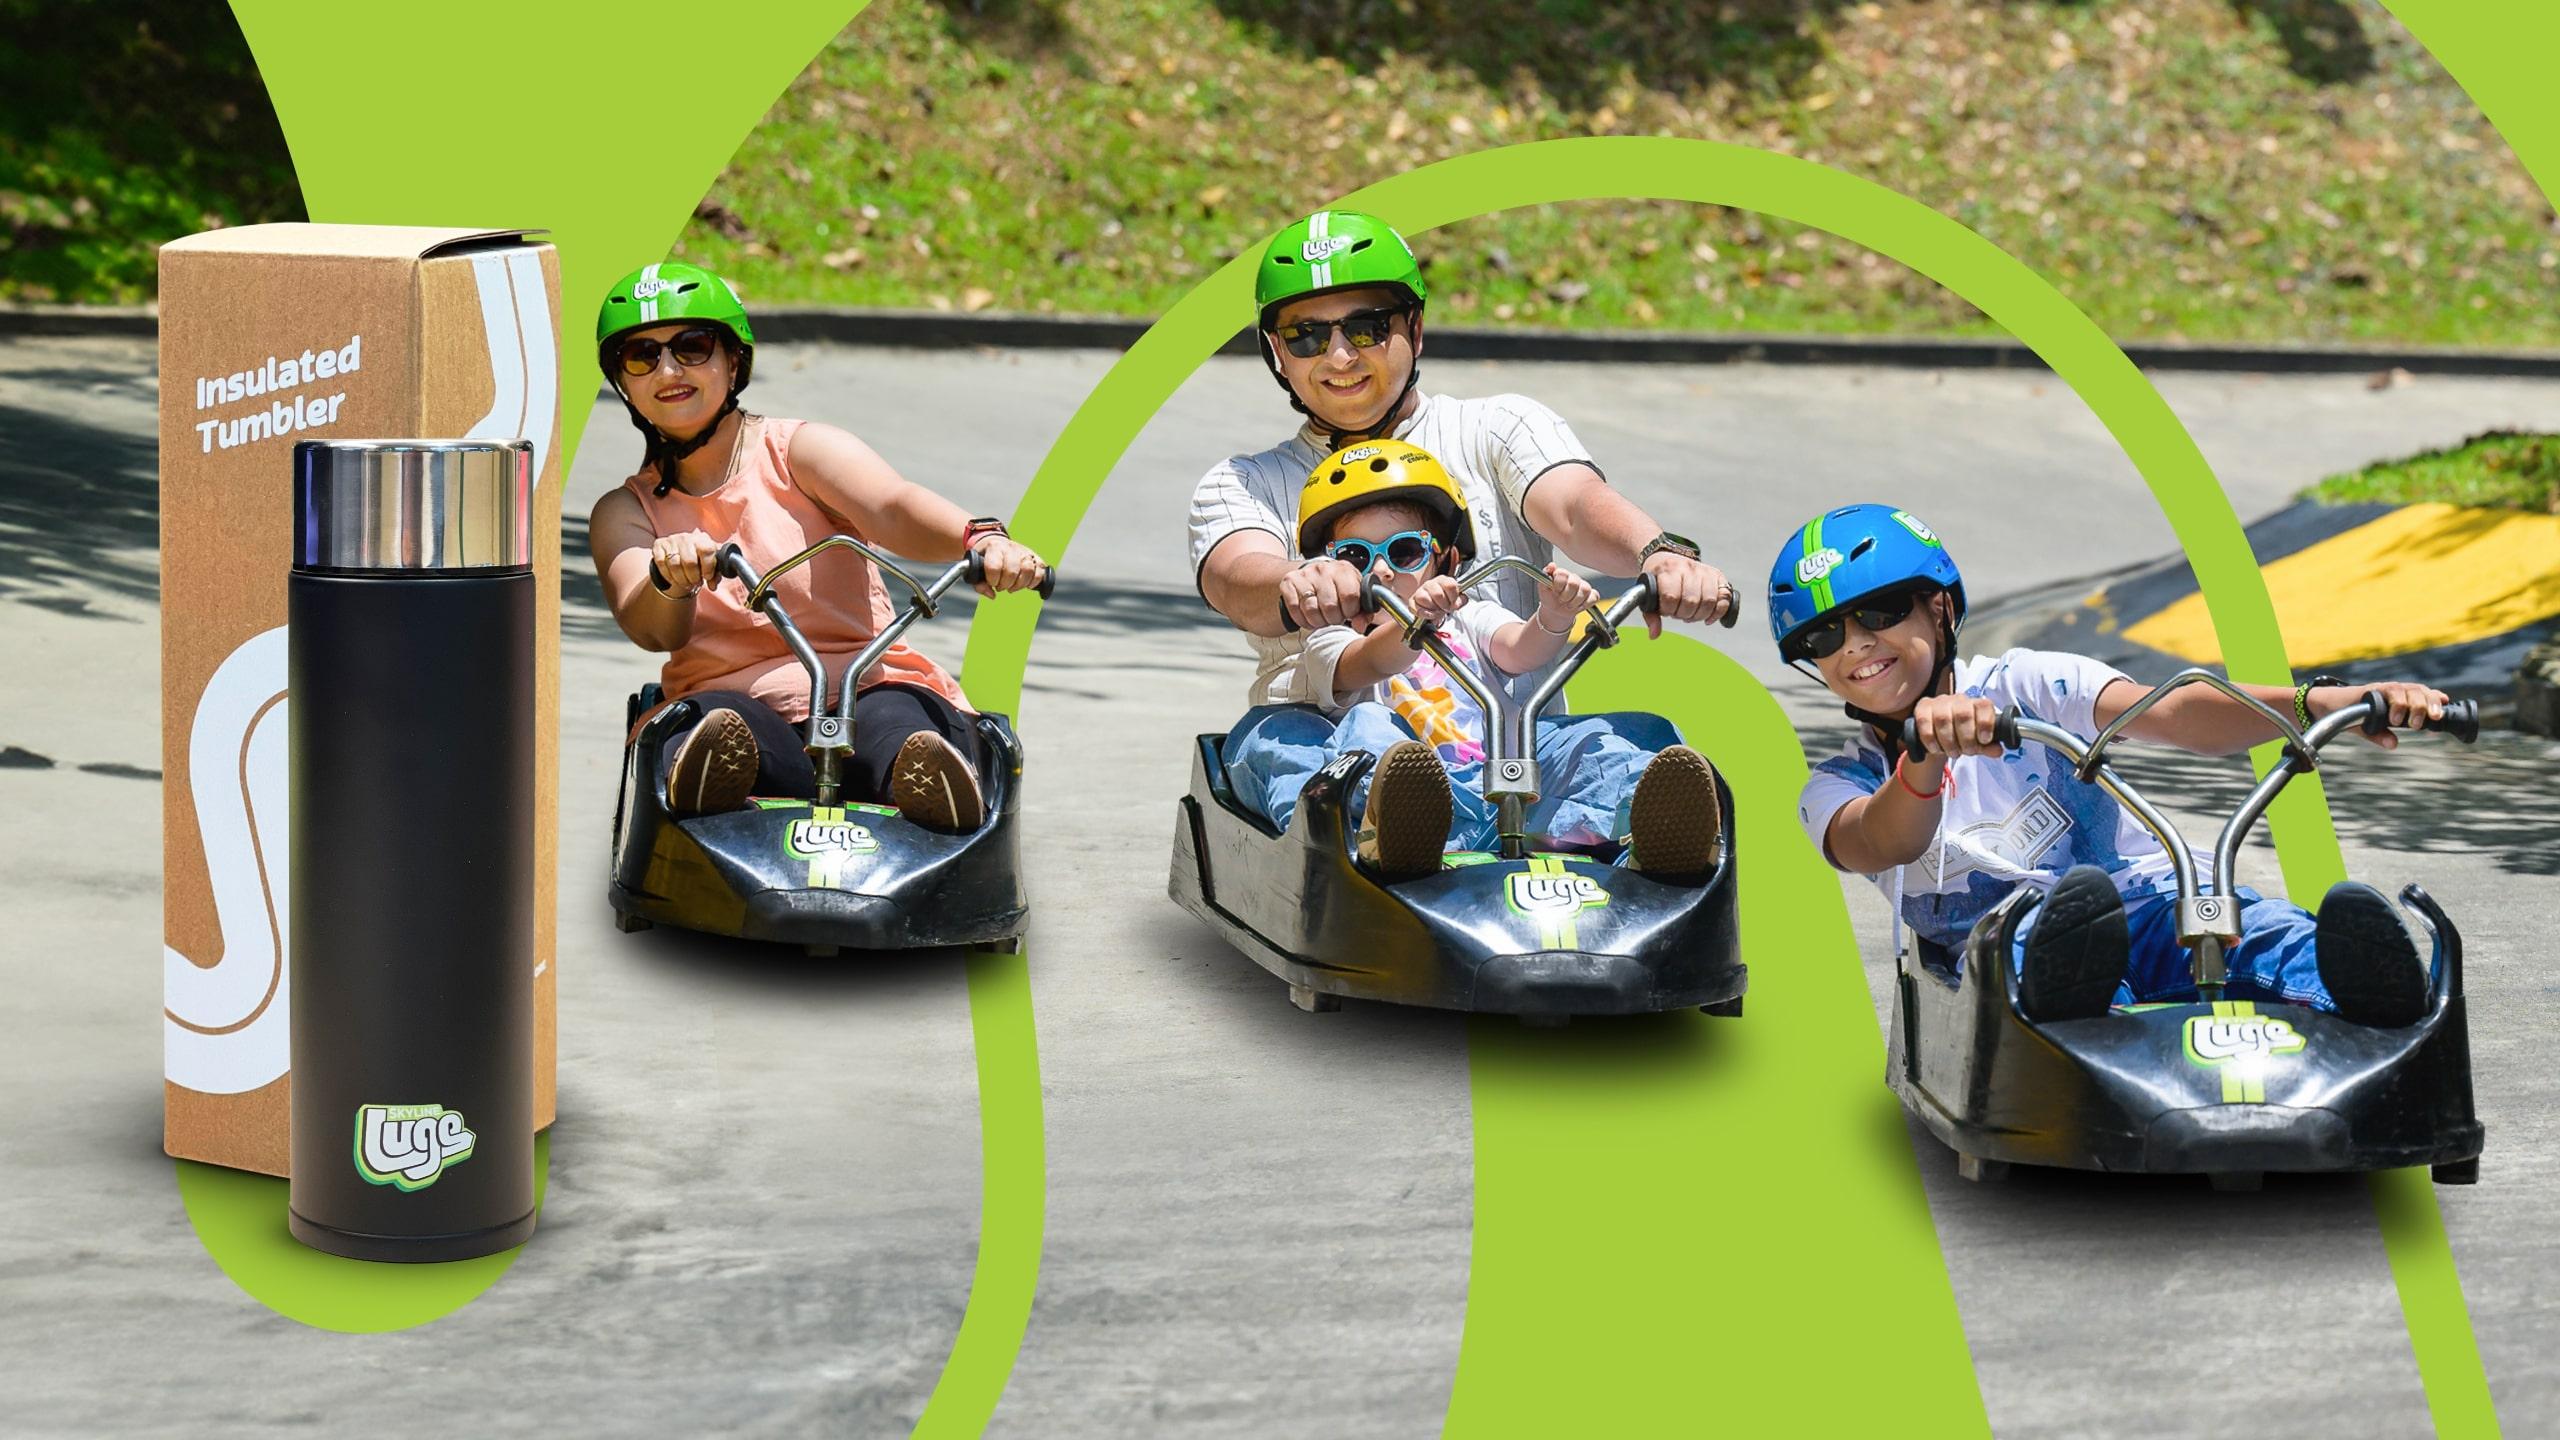 A family rides down the Luge together in Singapore with a promotional Luge flask photoshopped onto the image.